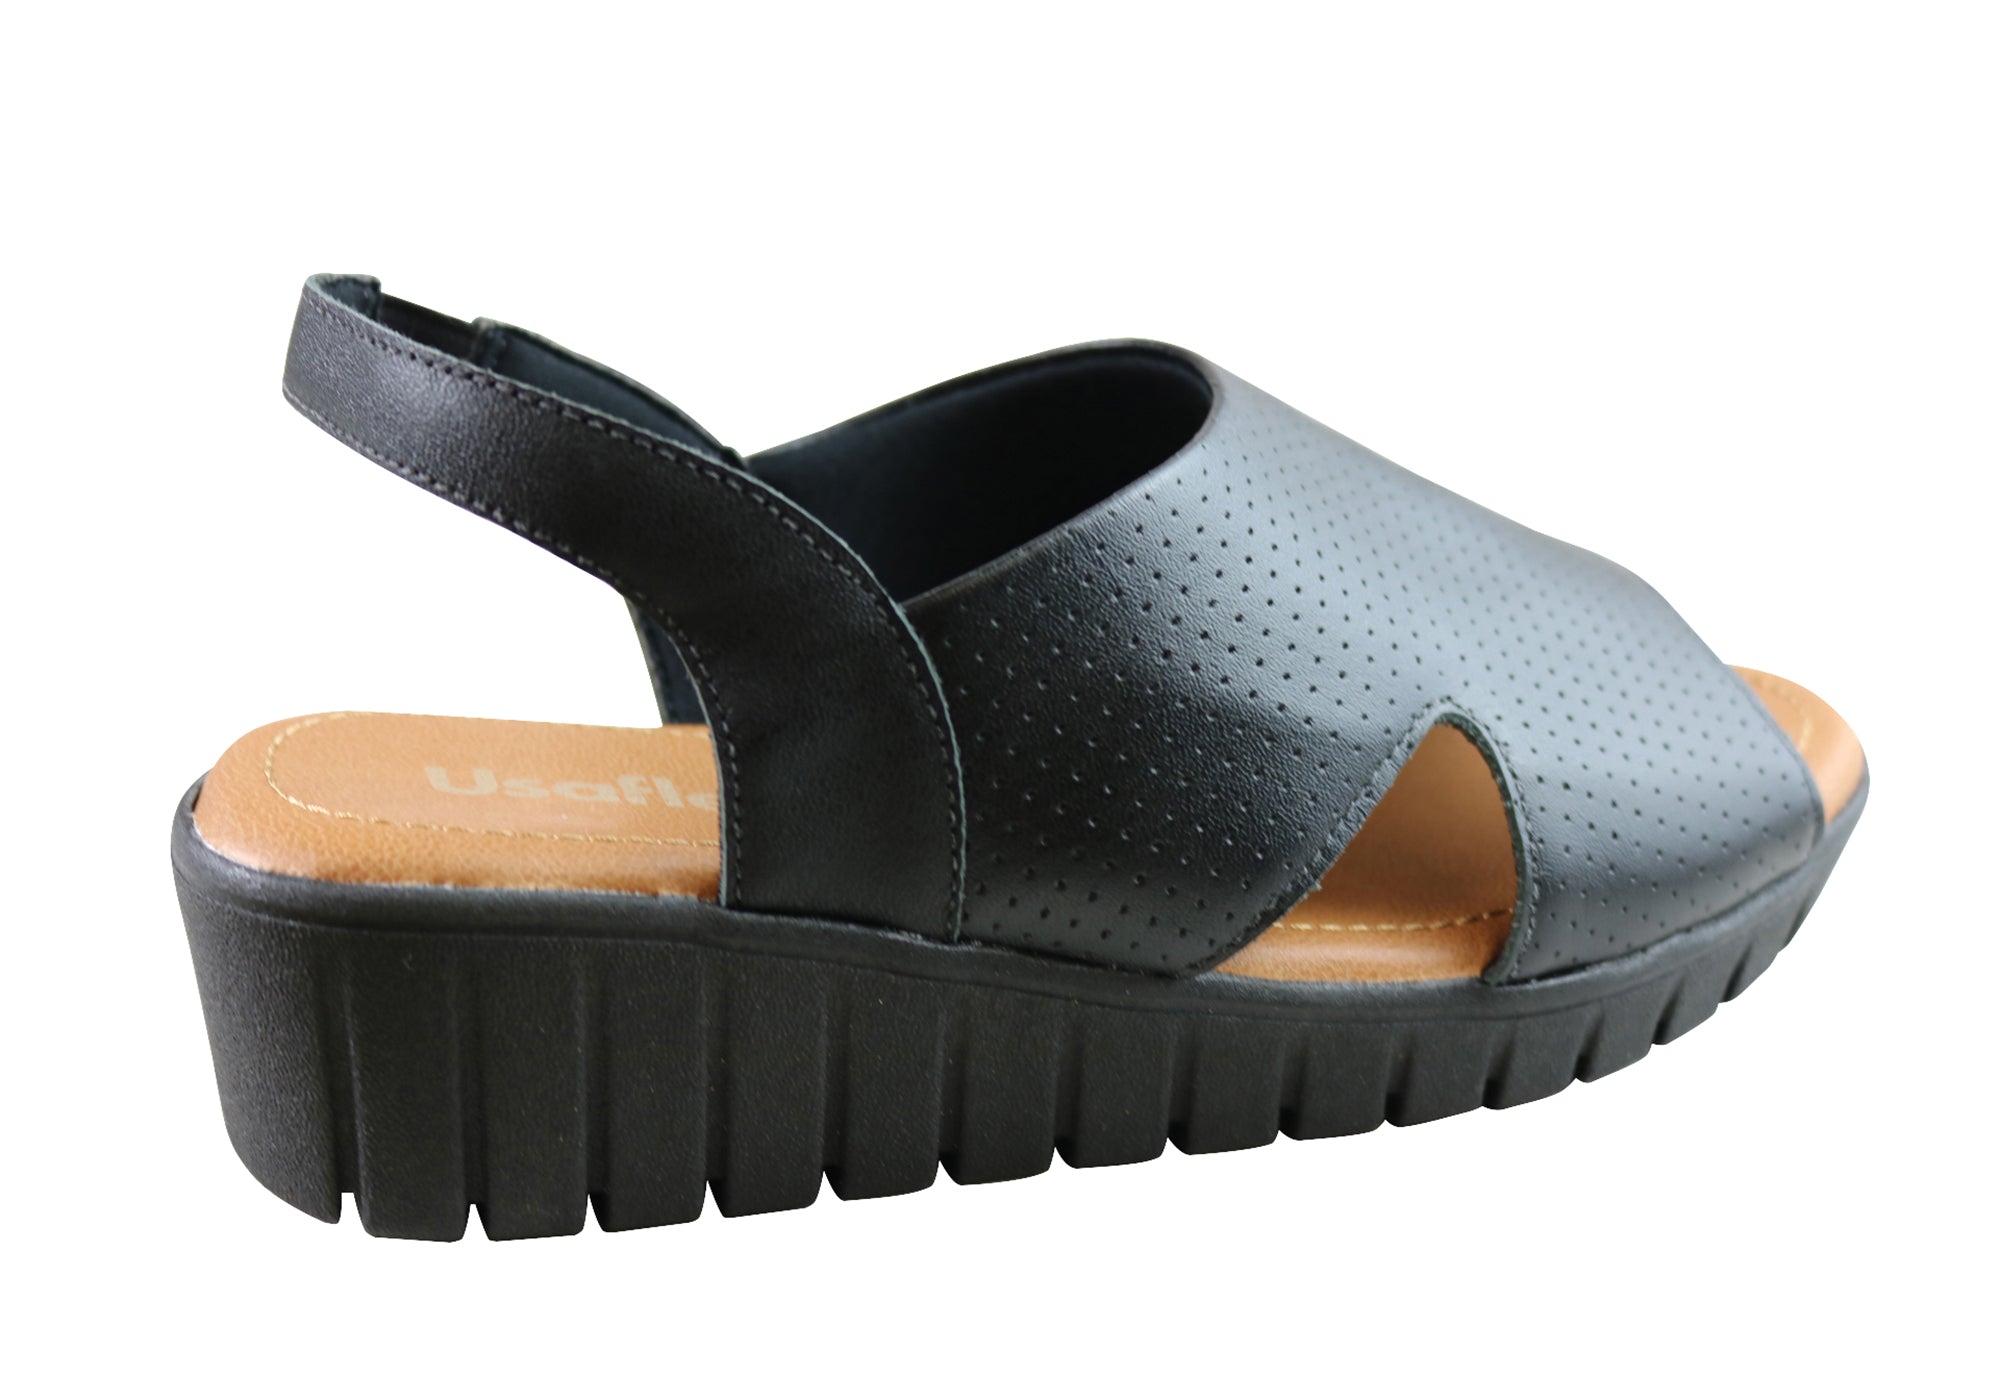 Usaflex Laken Womens Comfortable Leather Sandals Made In Brazil